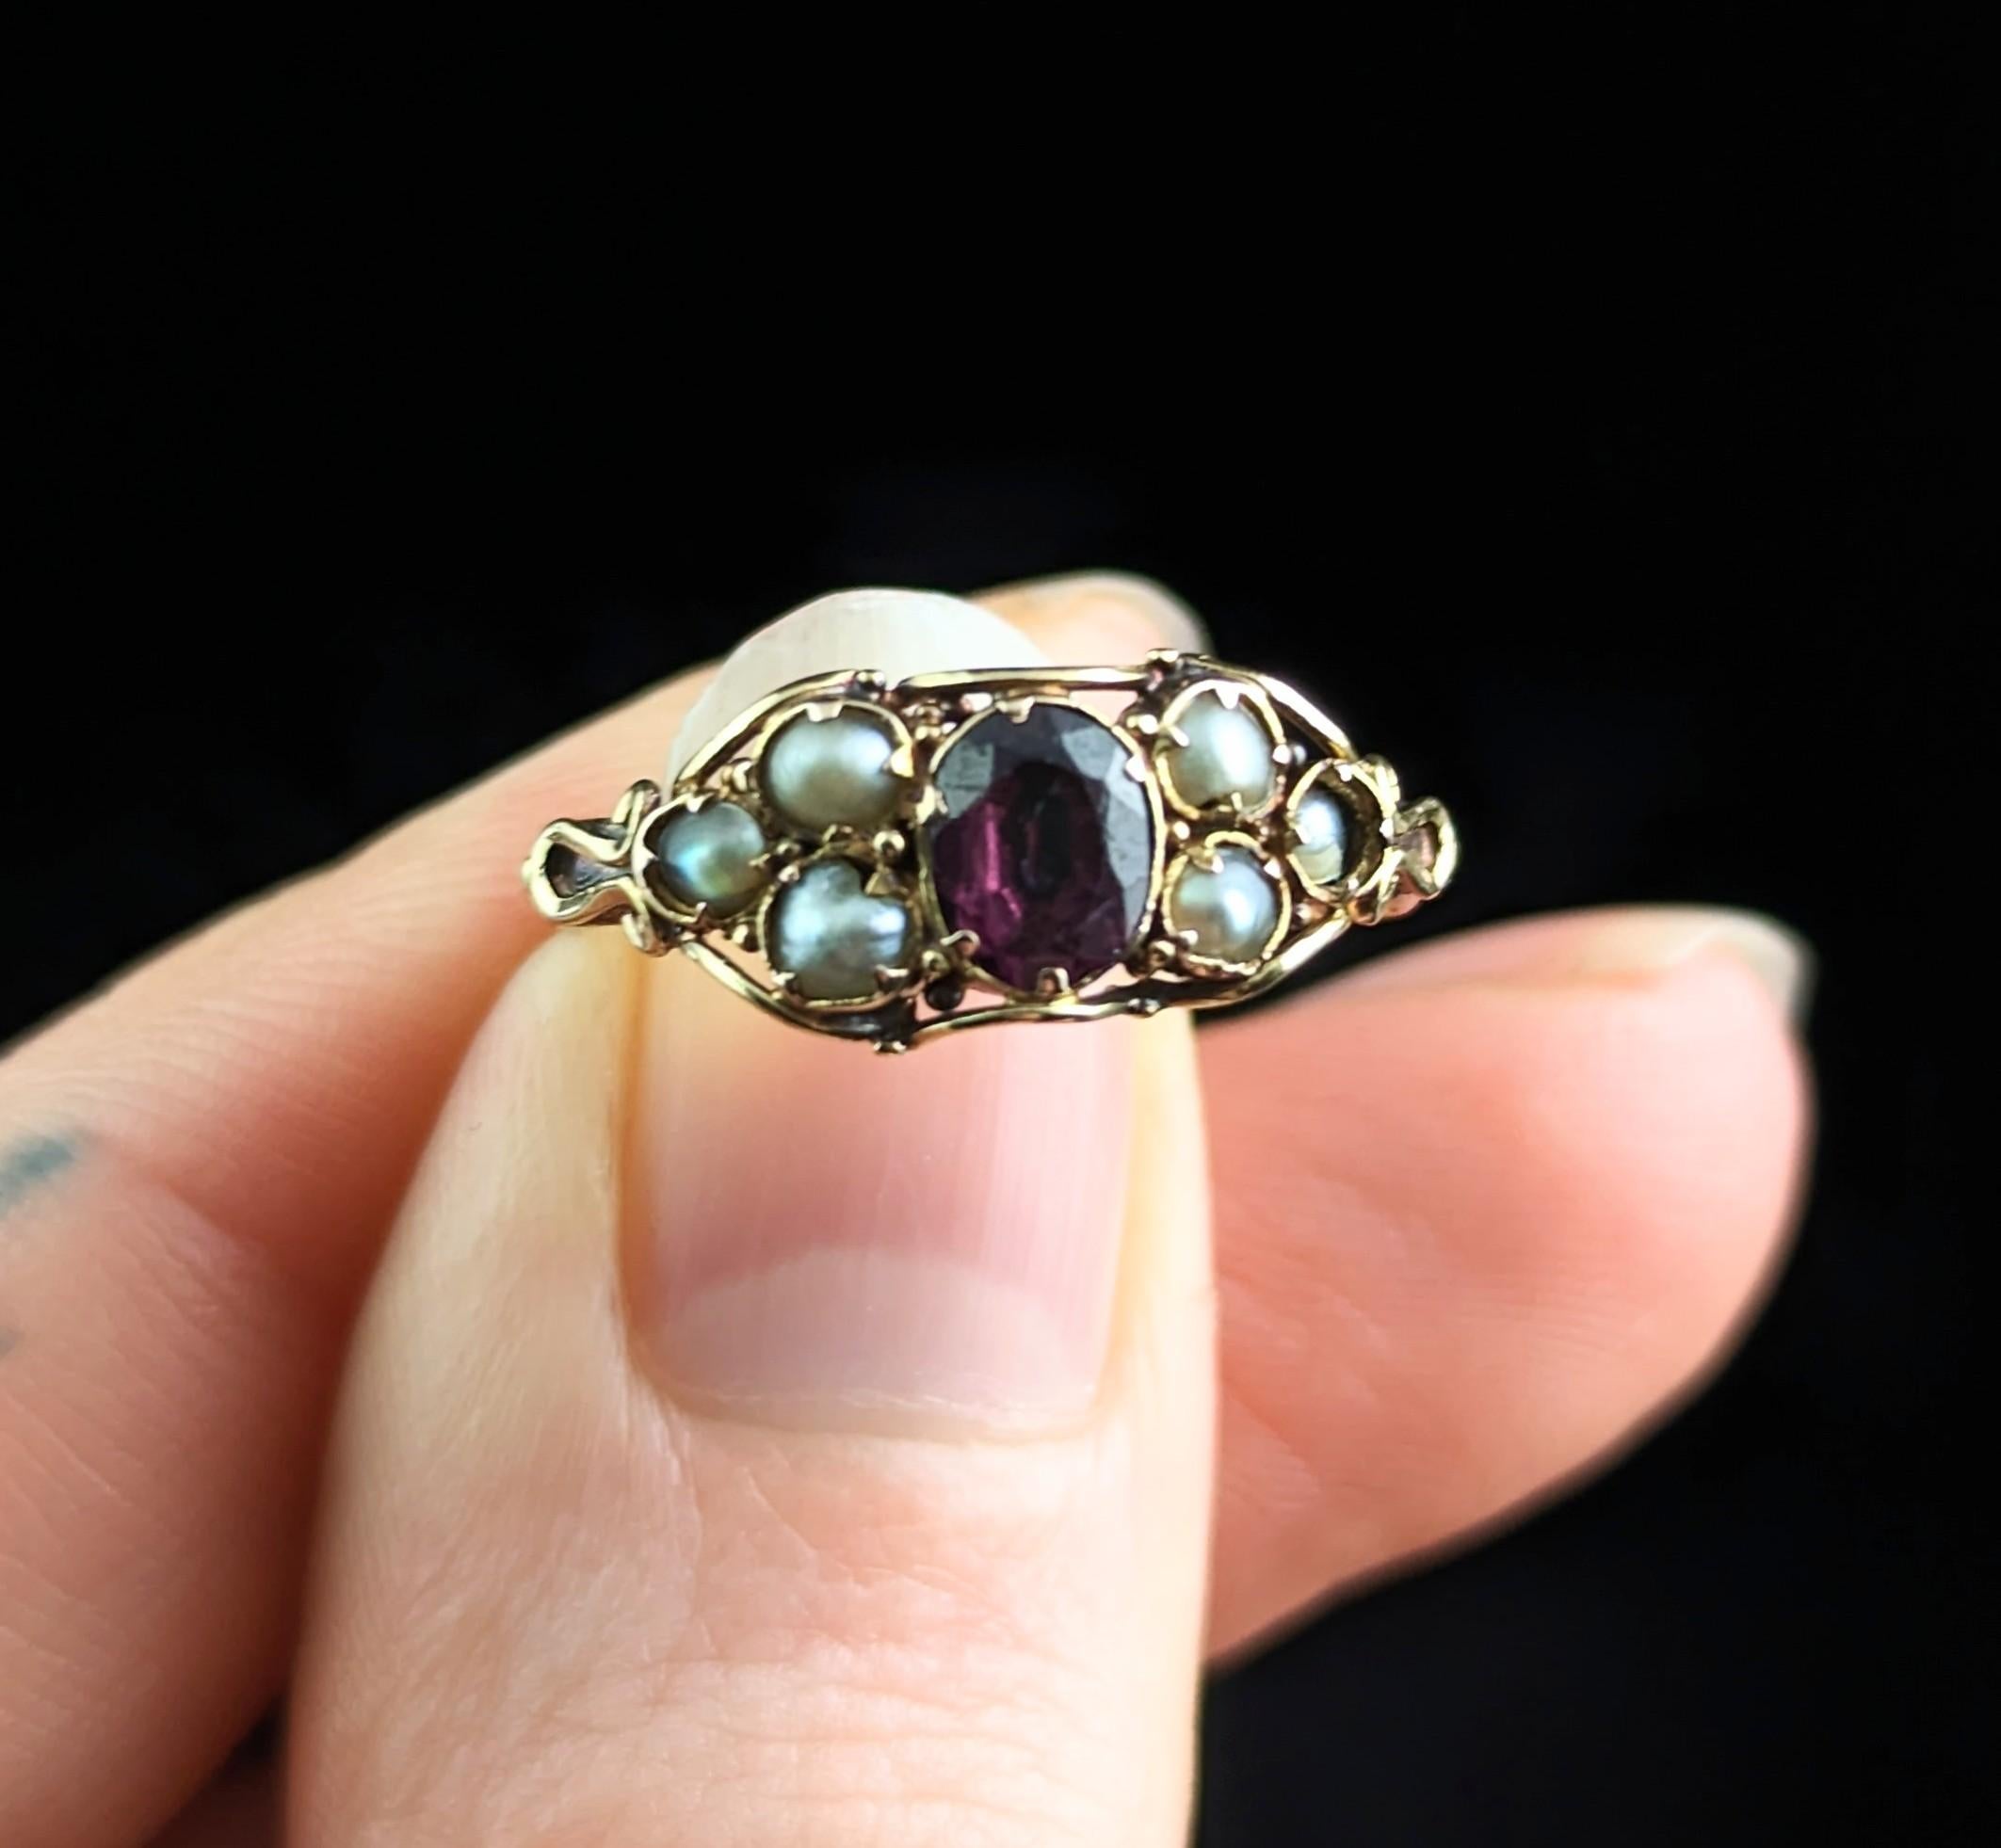 Antique Almandine Garnet and Pearl Ring, 22k Yellow Gold 1